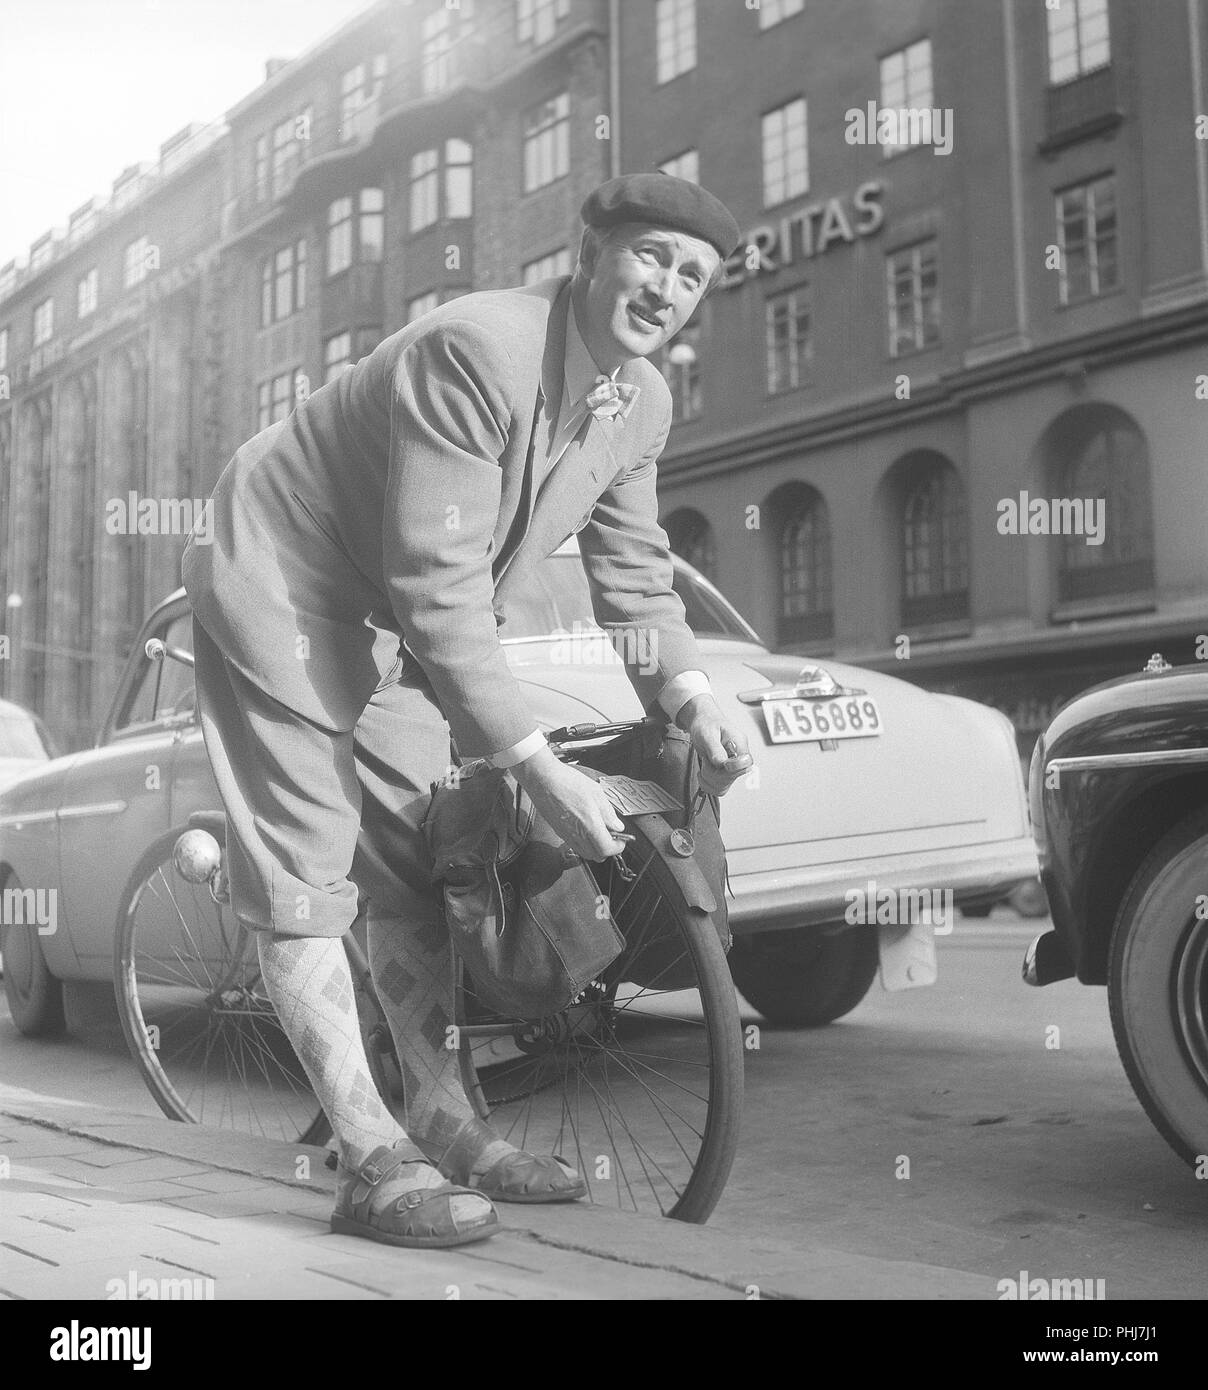 1950s man with his bicycle. A man in has parked his bicycle and balancing it on the kerb. He puts a chain around the back wheel, unabling it from being stolen. Notice the registration sign on the bicycle that was a mandatory item at this time.  Sweden 1954. Photo Kristoffersson ref BP57-5 Stock Photo